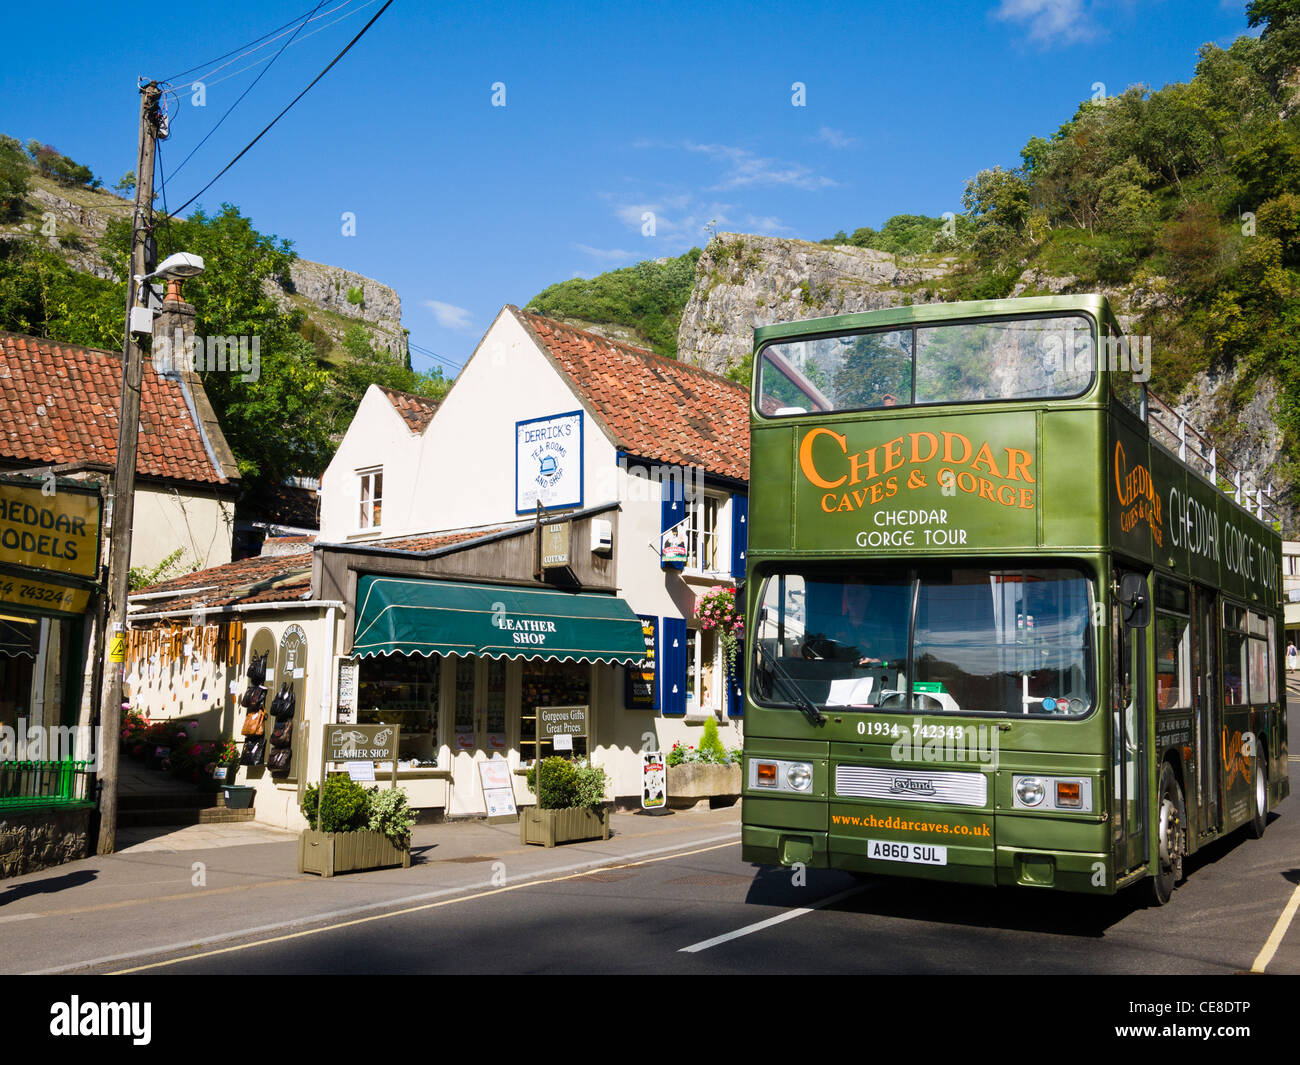 An open top bus conducting a tour of Cheddar Gorge, Somerset, England. Stock Photo